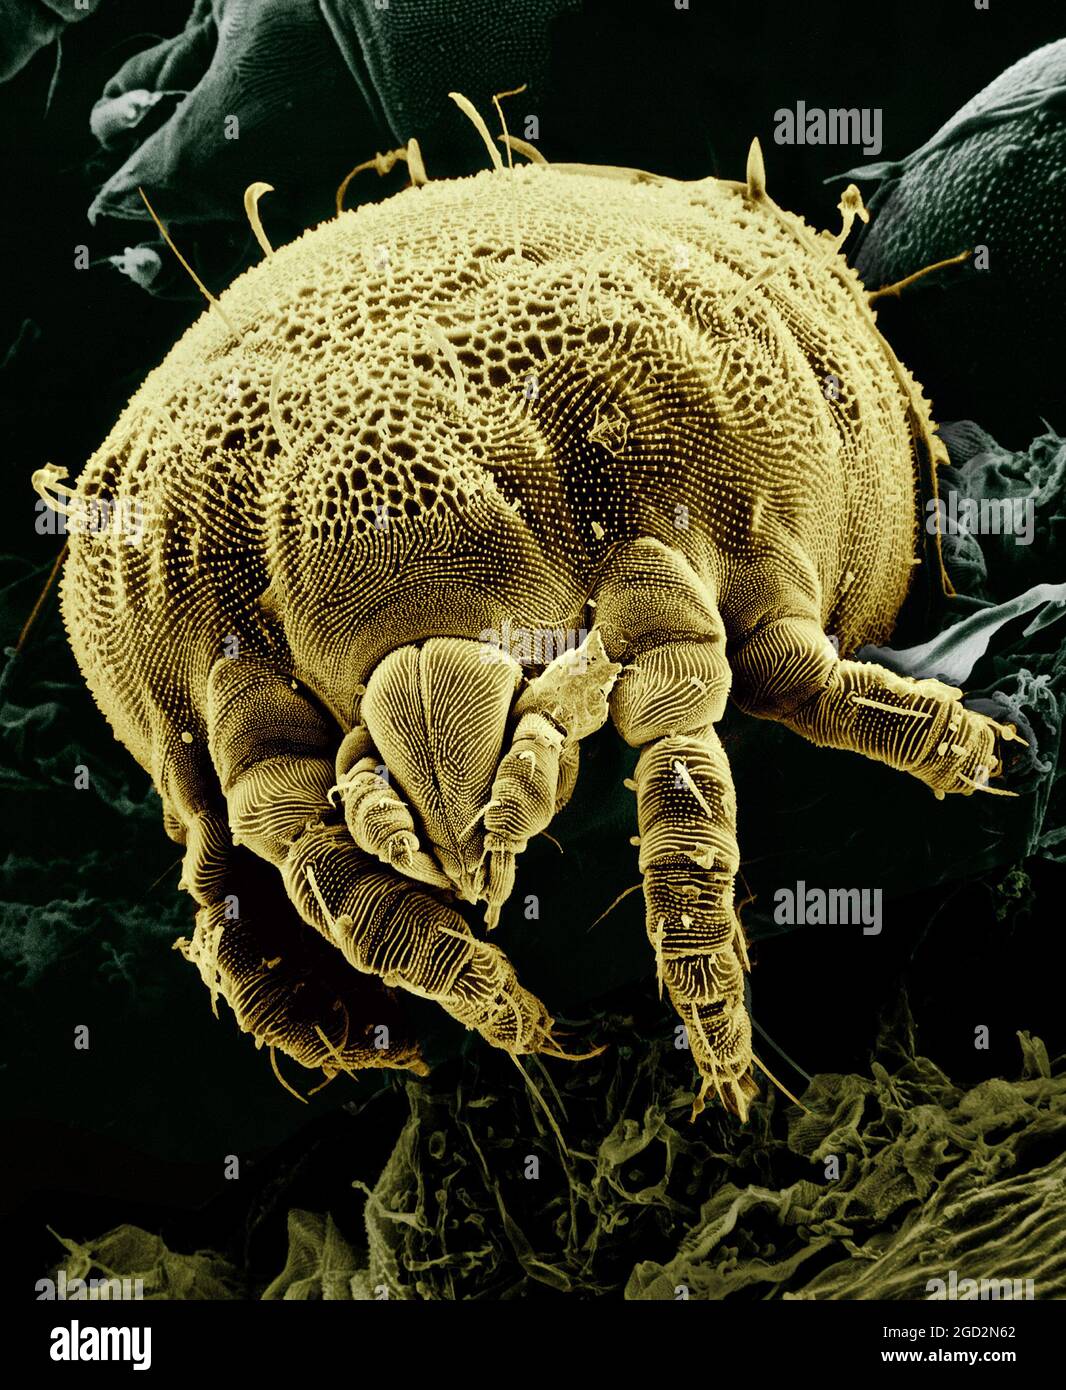 A yellow mite, Lorryia formosa, commonly found on citrus plants, is shown among some fungi. False color. Magnified about 850x ca. 22 March 2005 Stock Photo